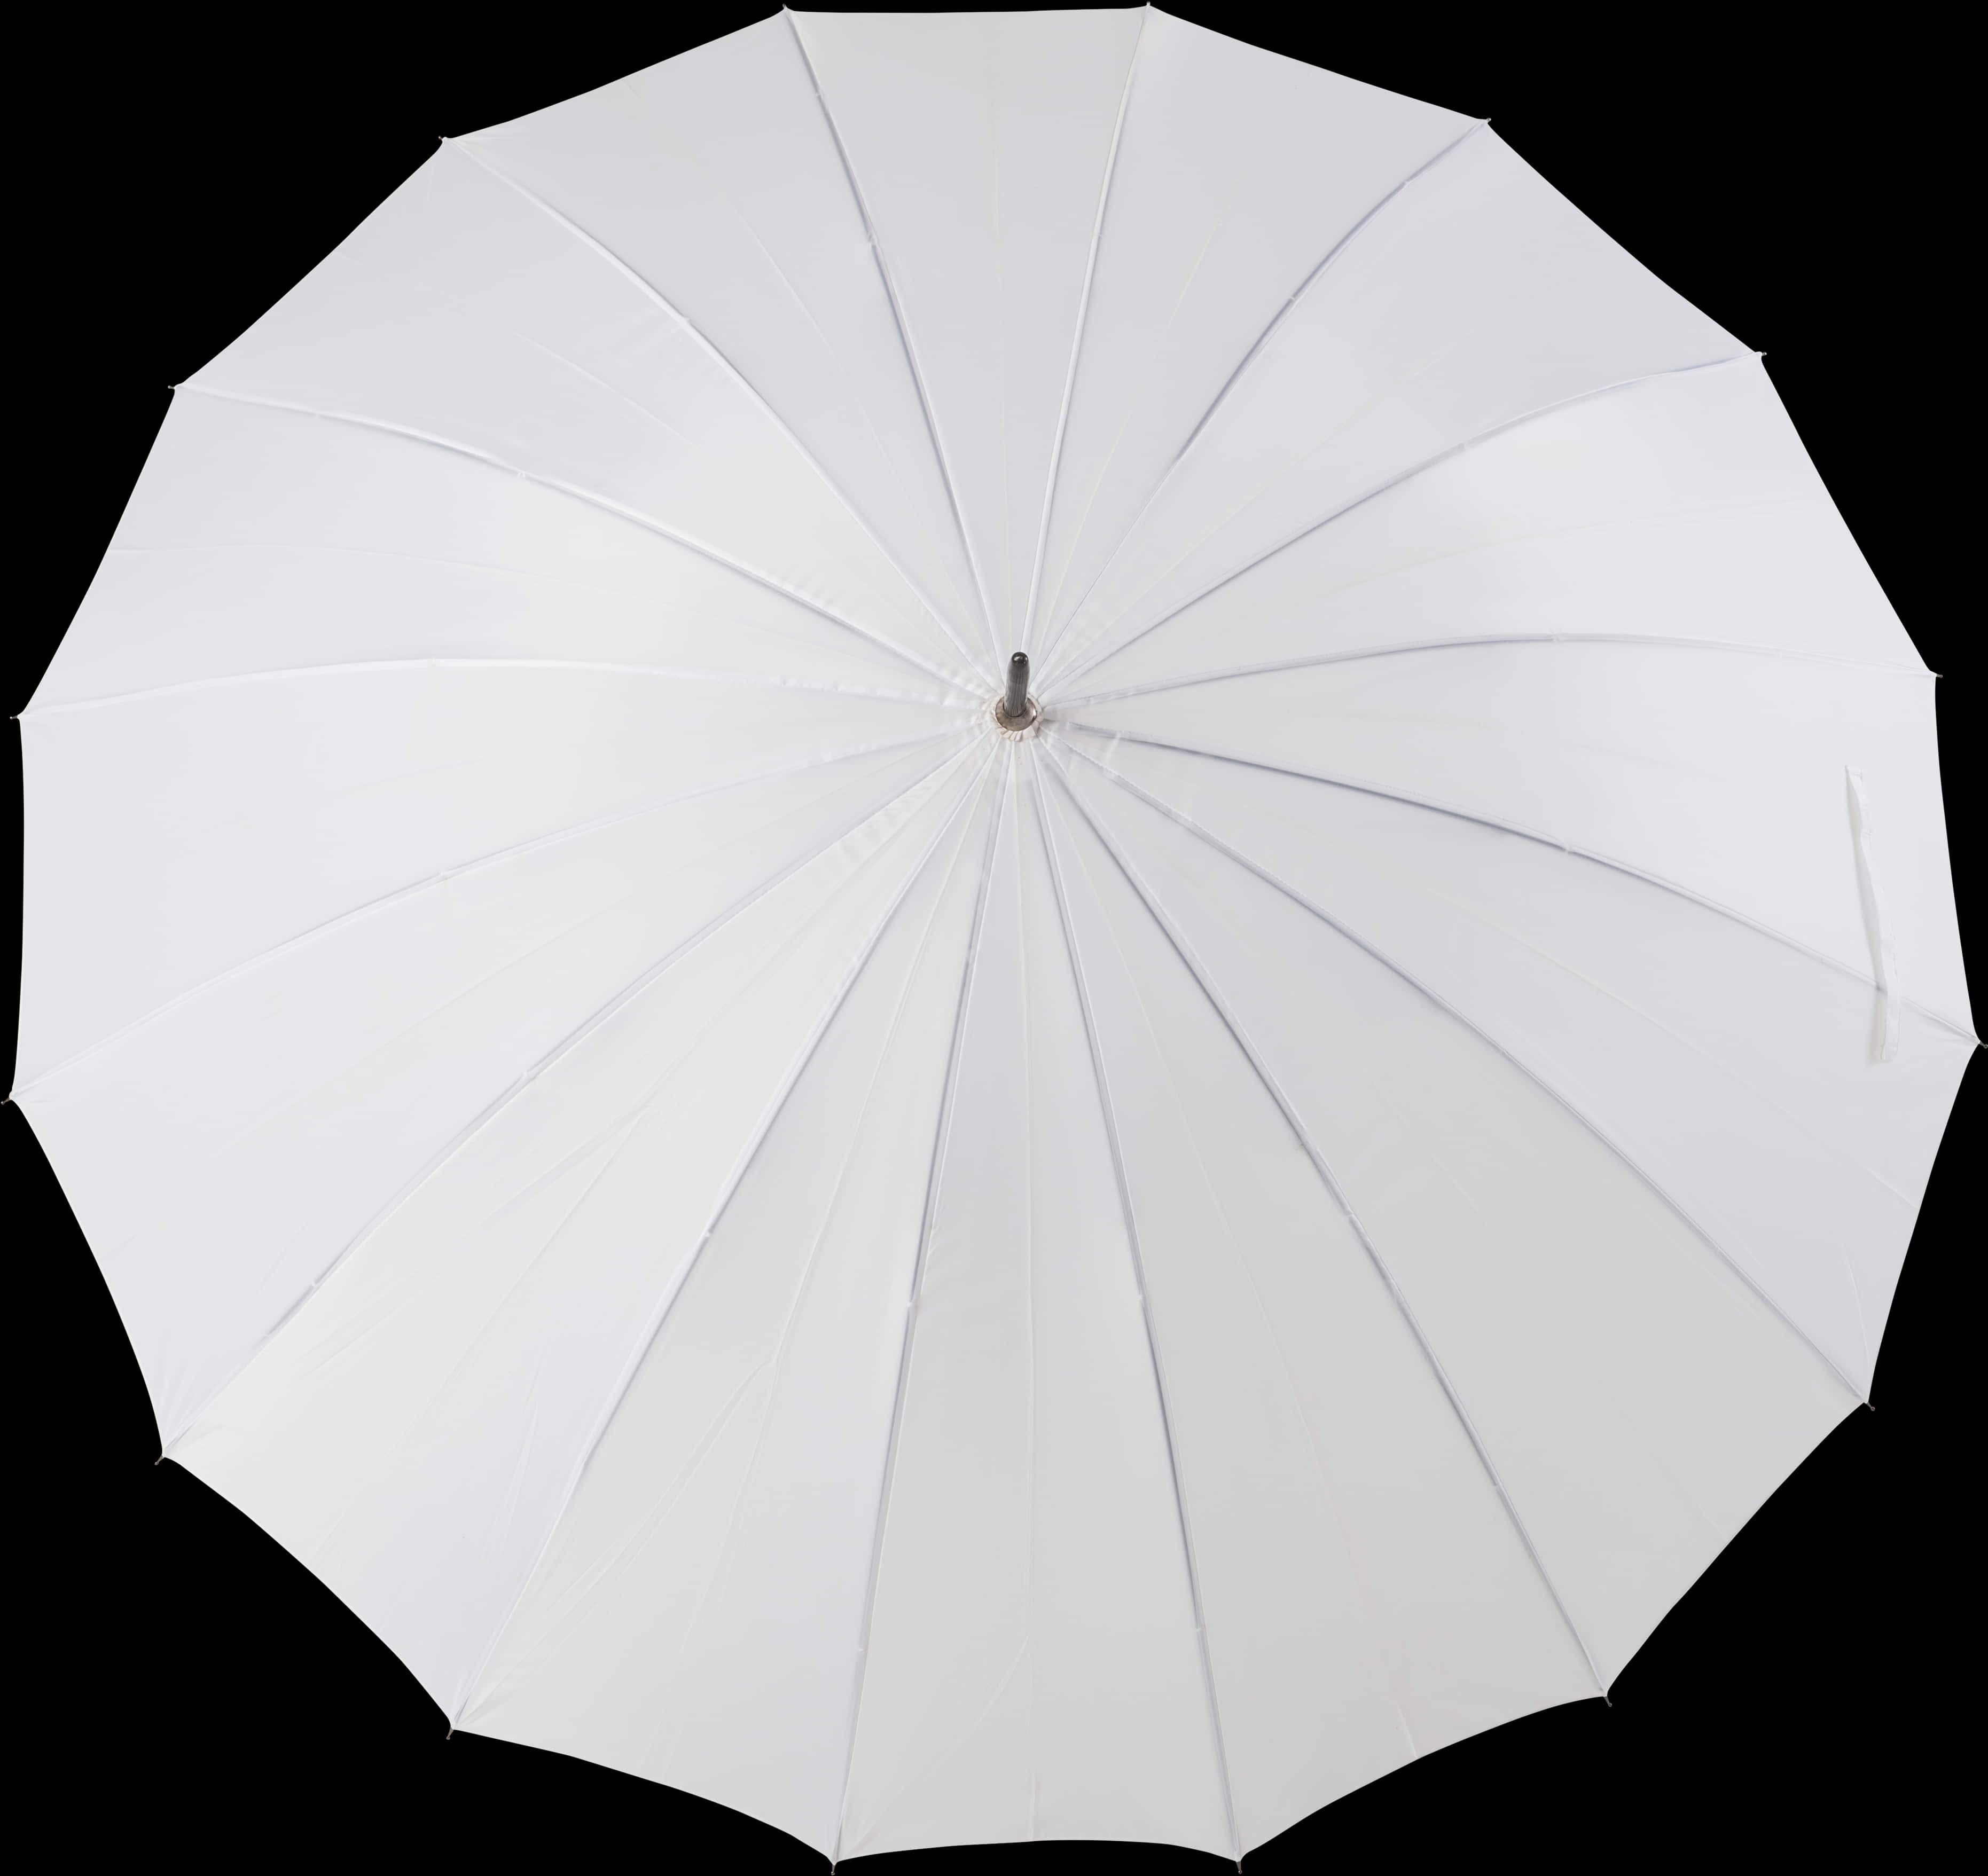 A White Umbrella With A Black Background